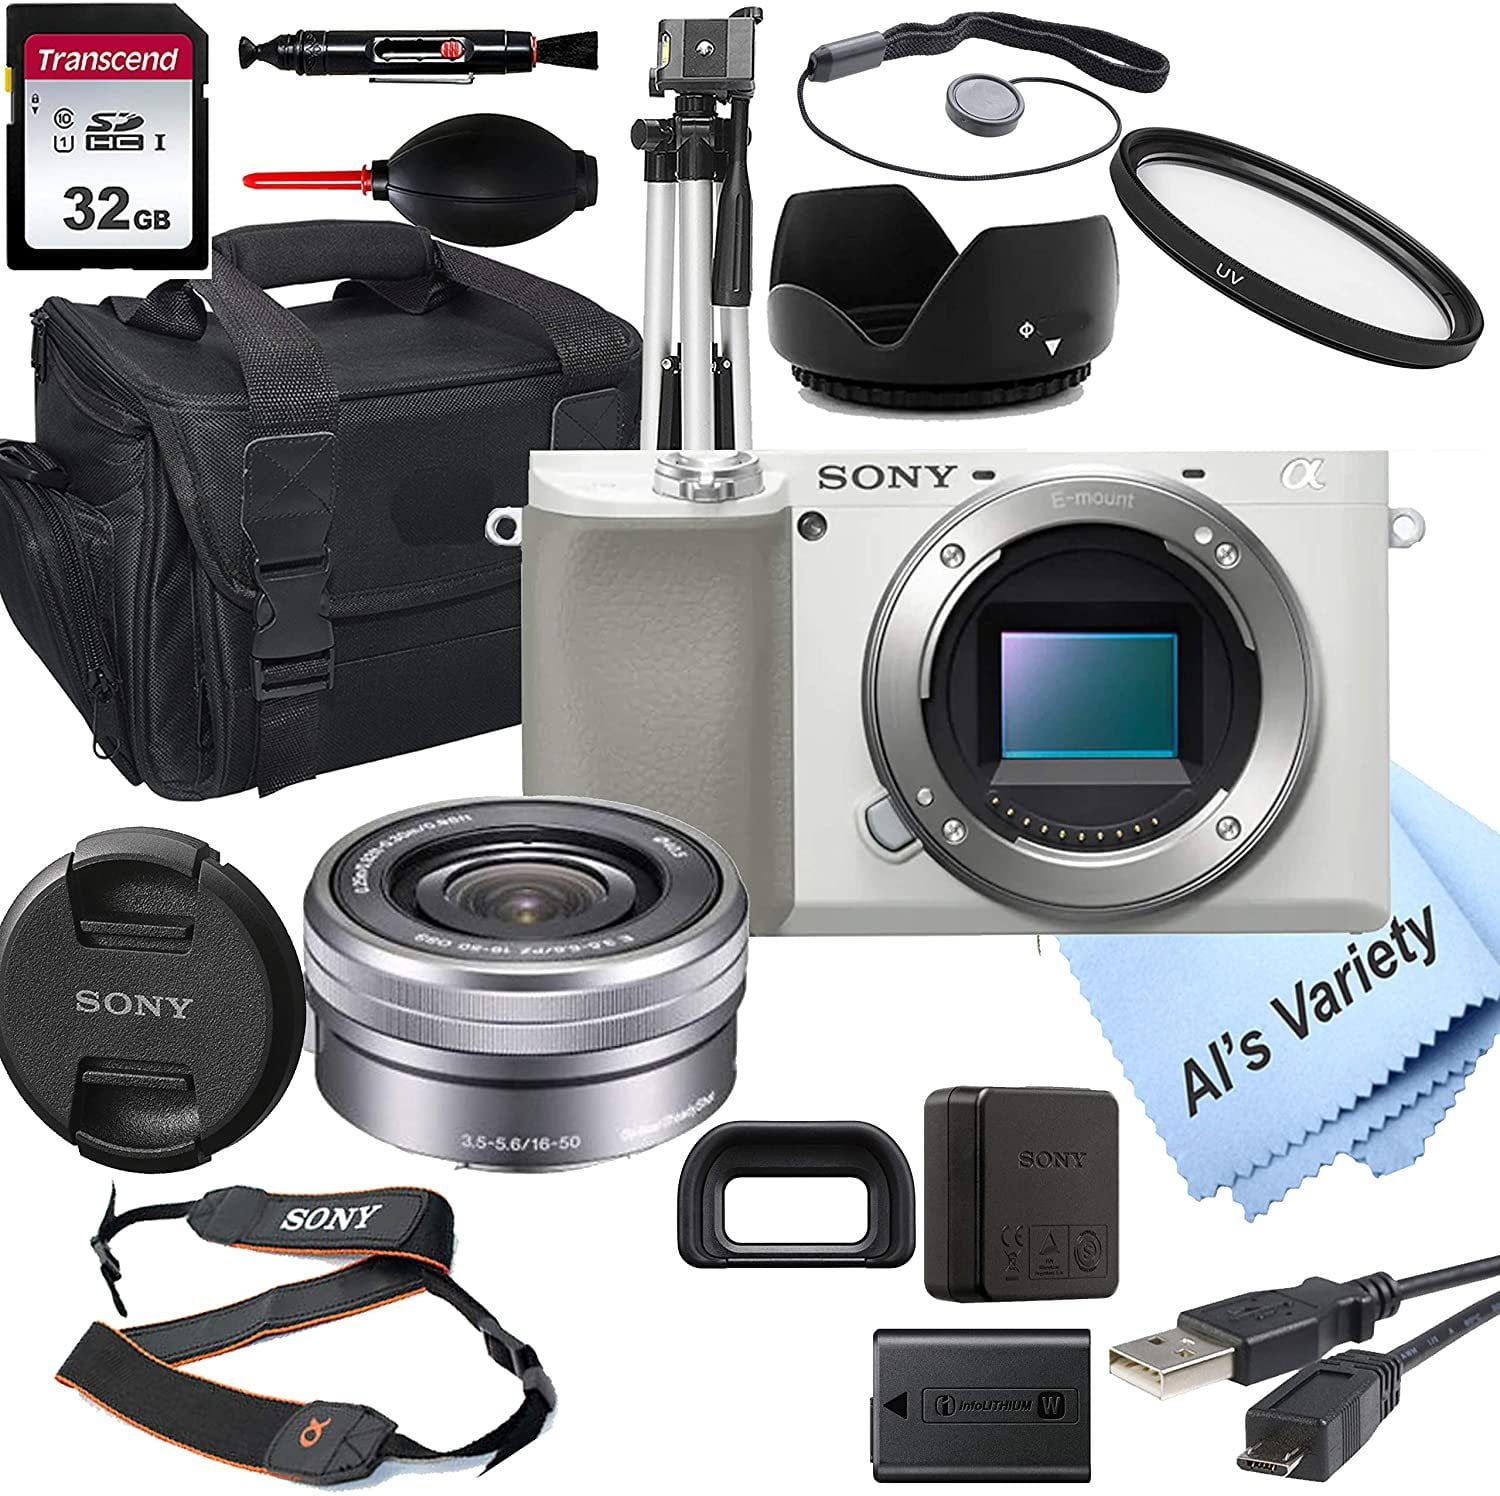 Sony Alpha A6100 Mirrorless Camera with 16-50mm Zoom Lens (White)  (International Model)